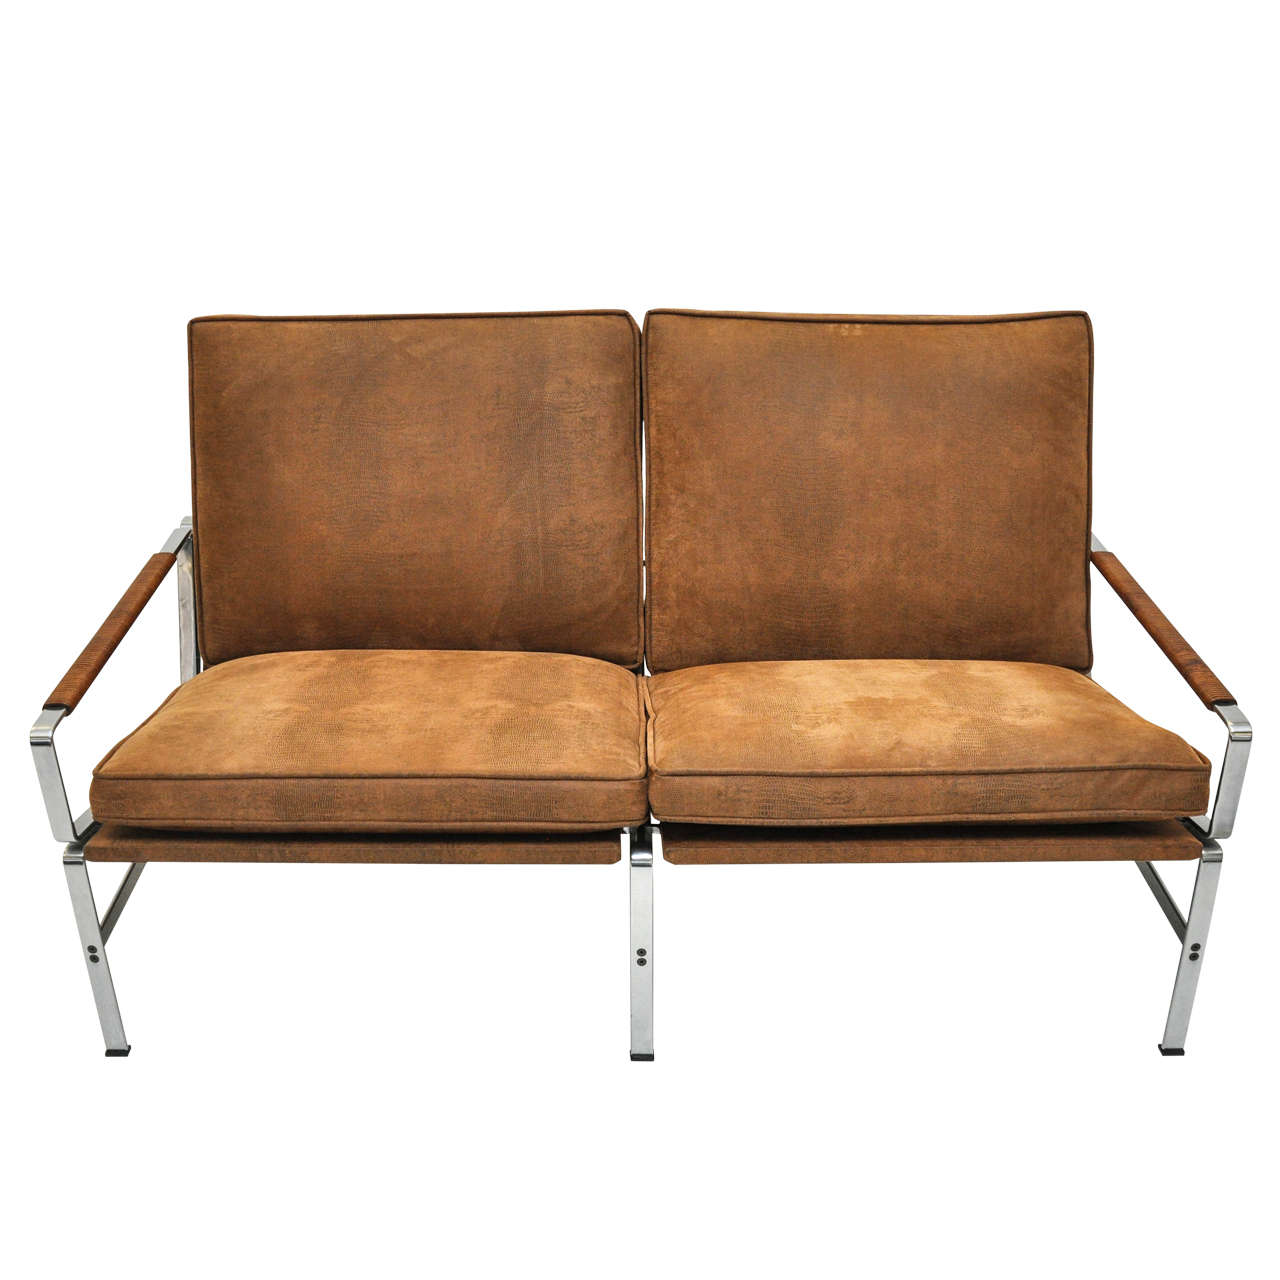 Fabricius and Kastholm FK 6720 Settee or Sofa